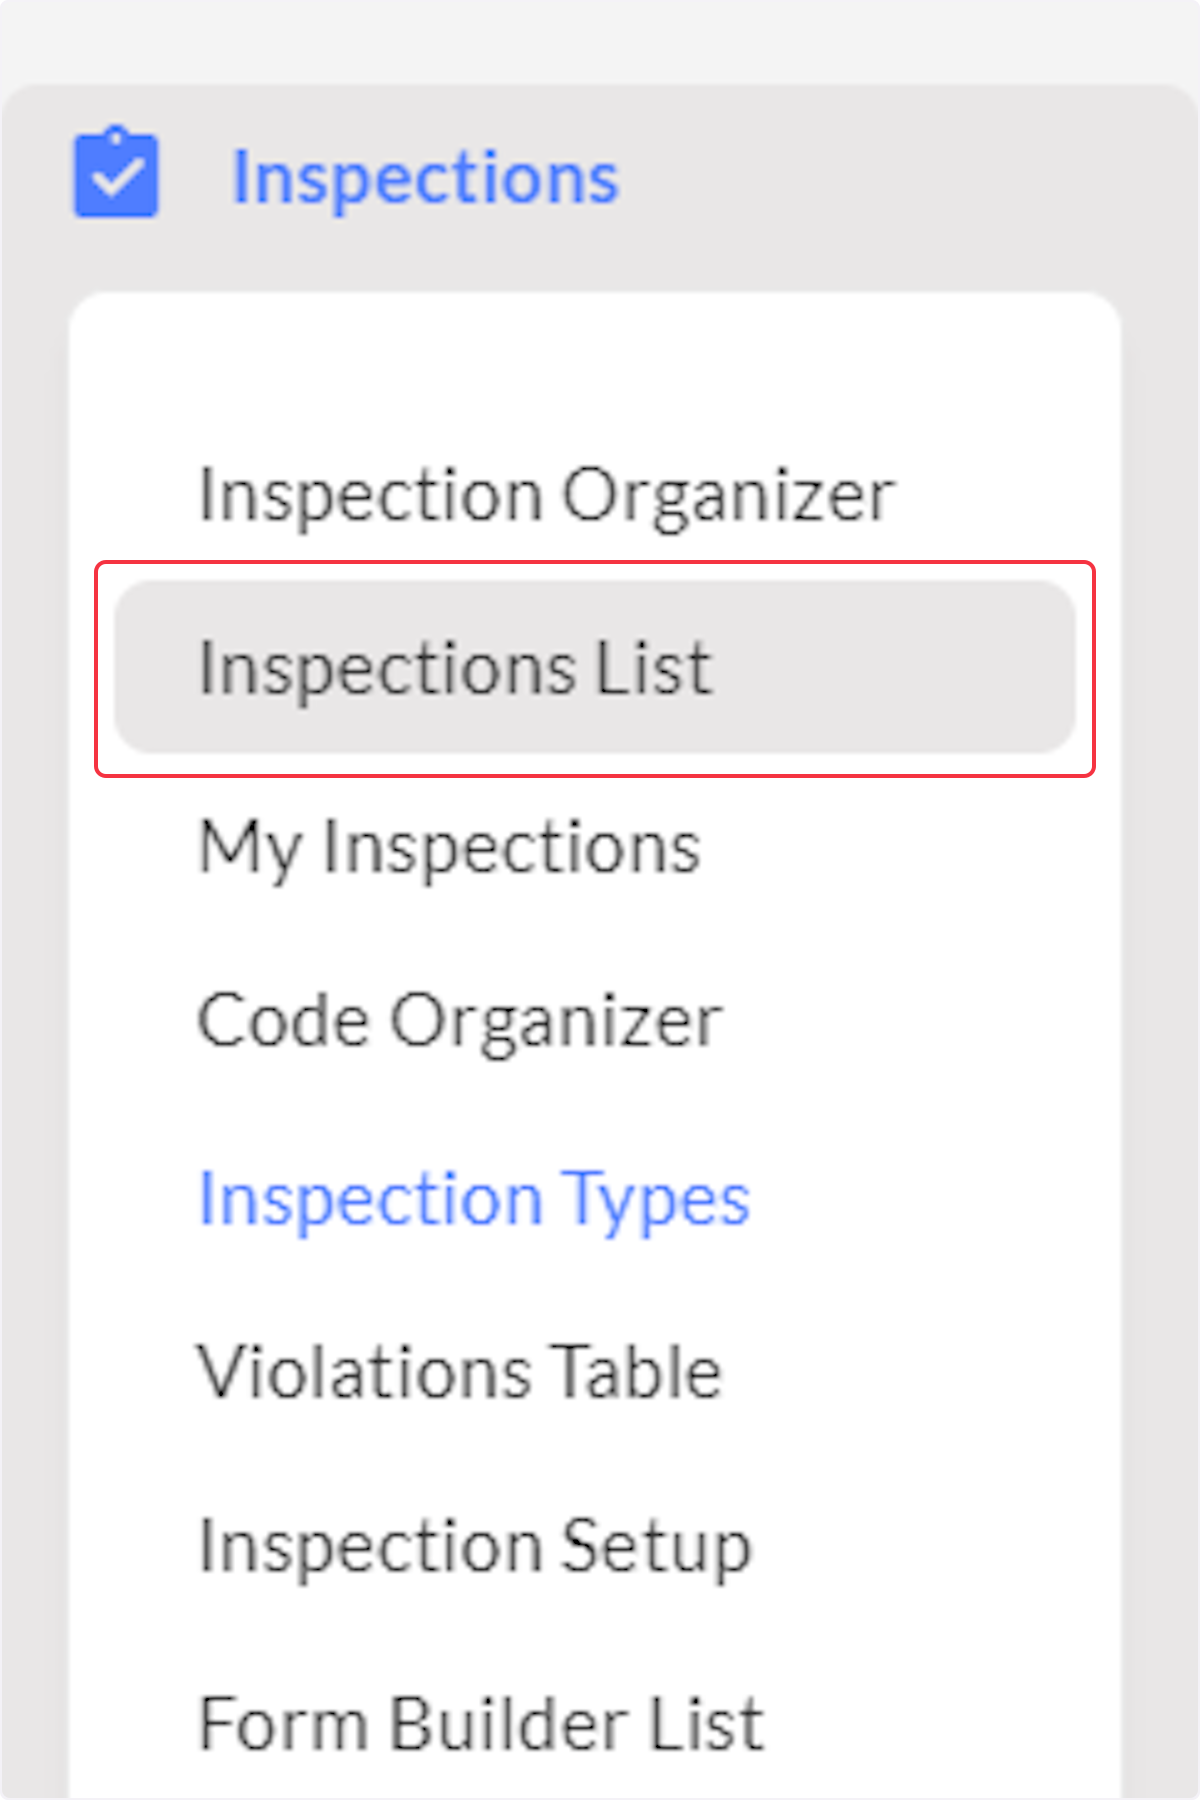 Navigate to the Inspections List and access the Inspection needing an Invoice.